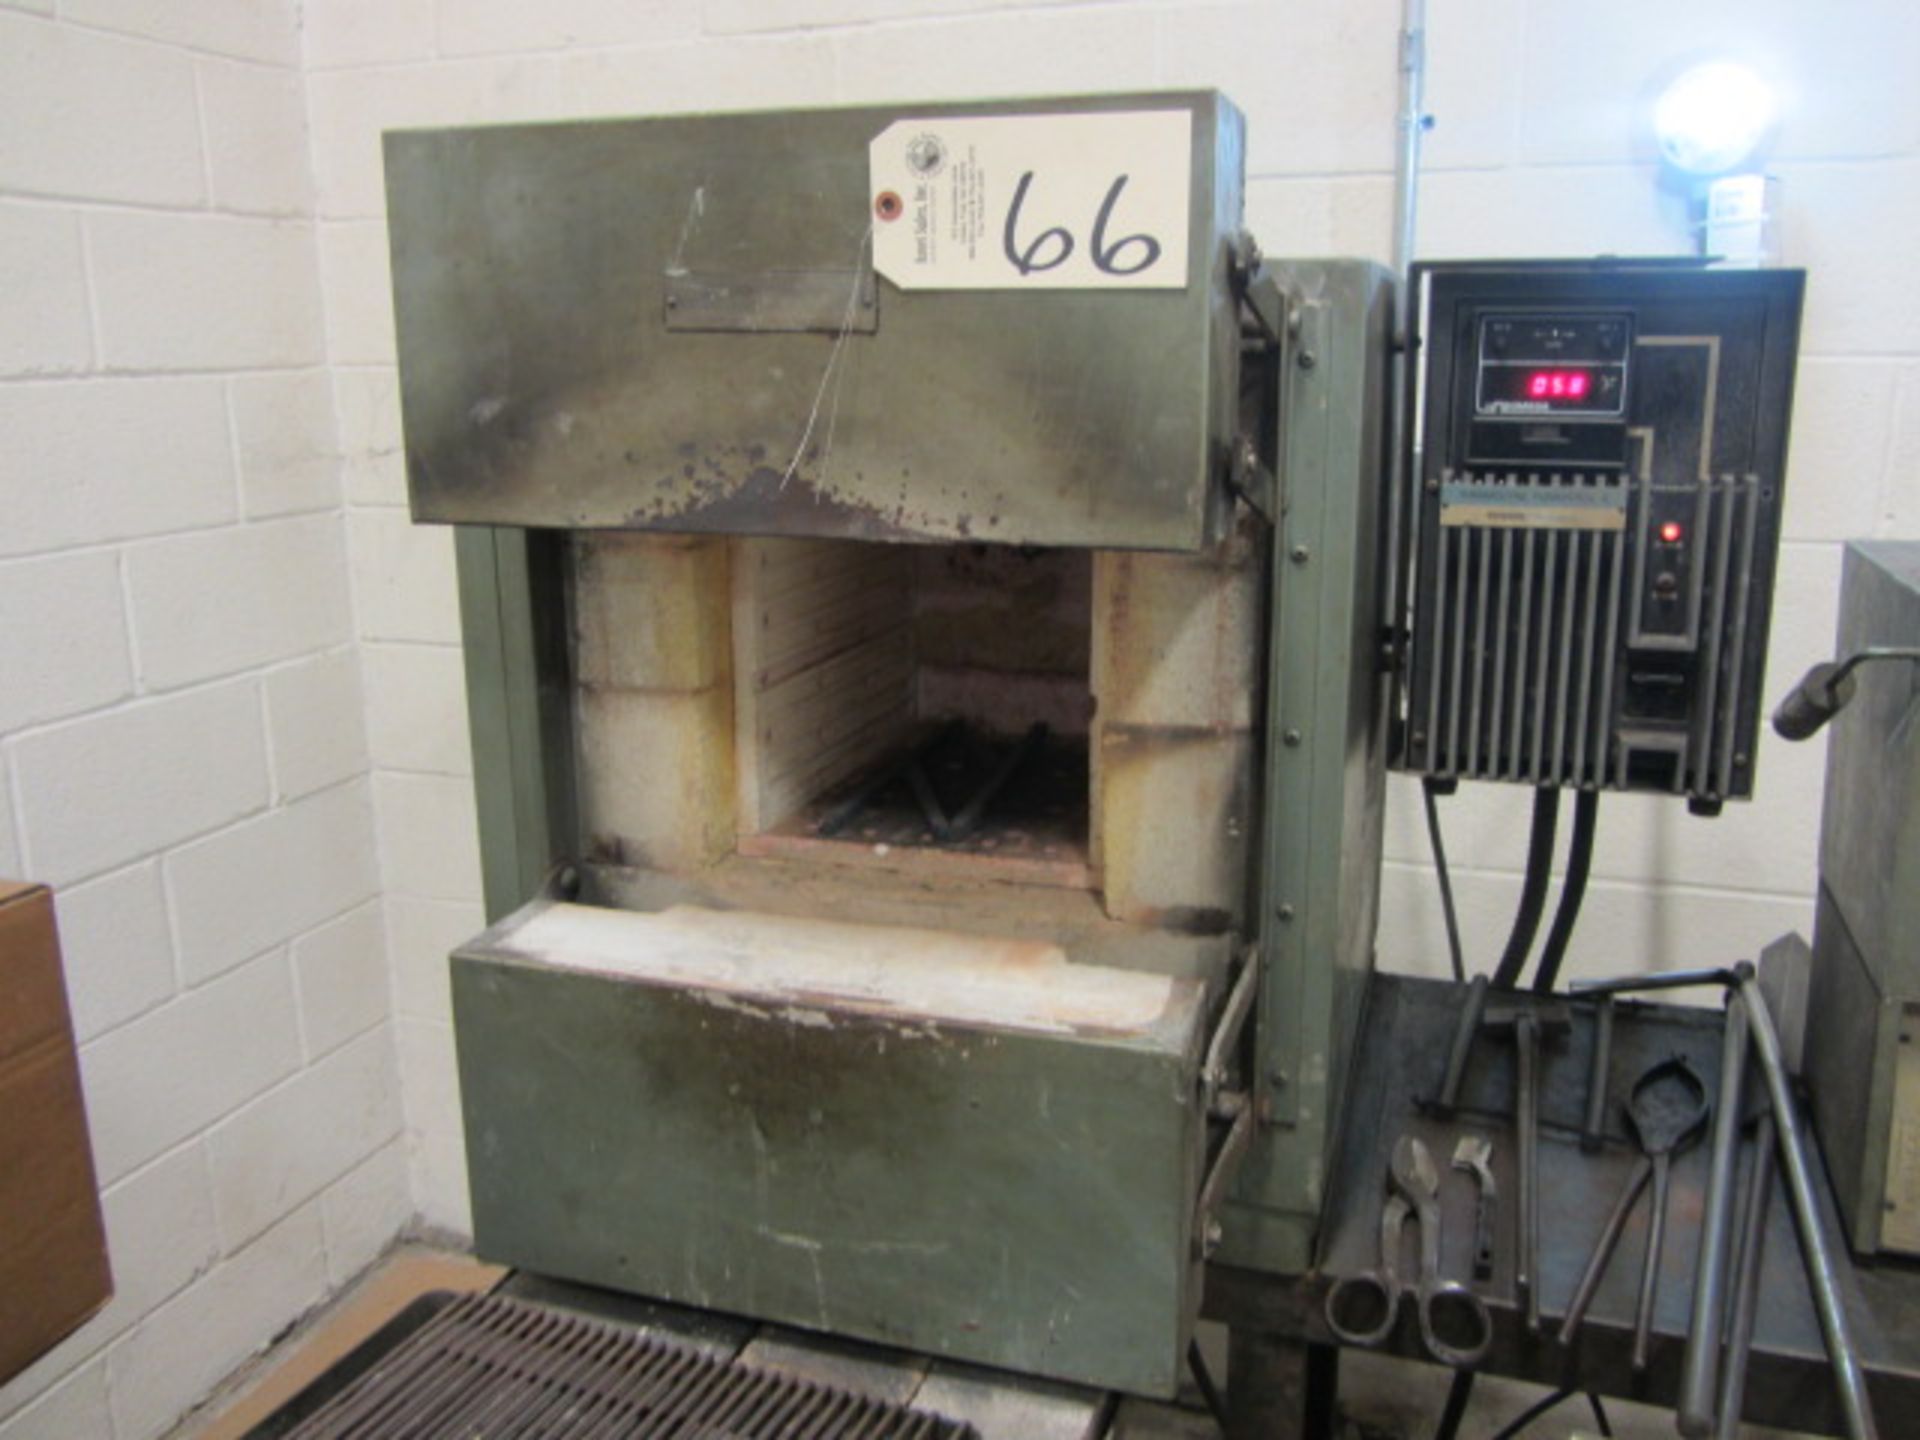 Thermolyne Type FA1730 Heat Treat Furnace with 1 Phase, 5600 Watts, Series 83, sn:6183